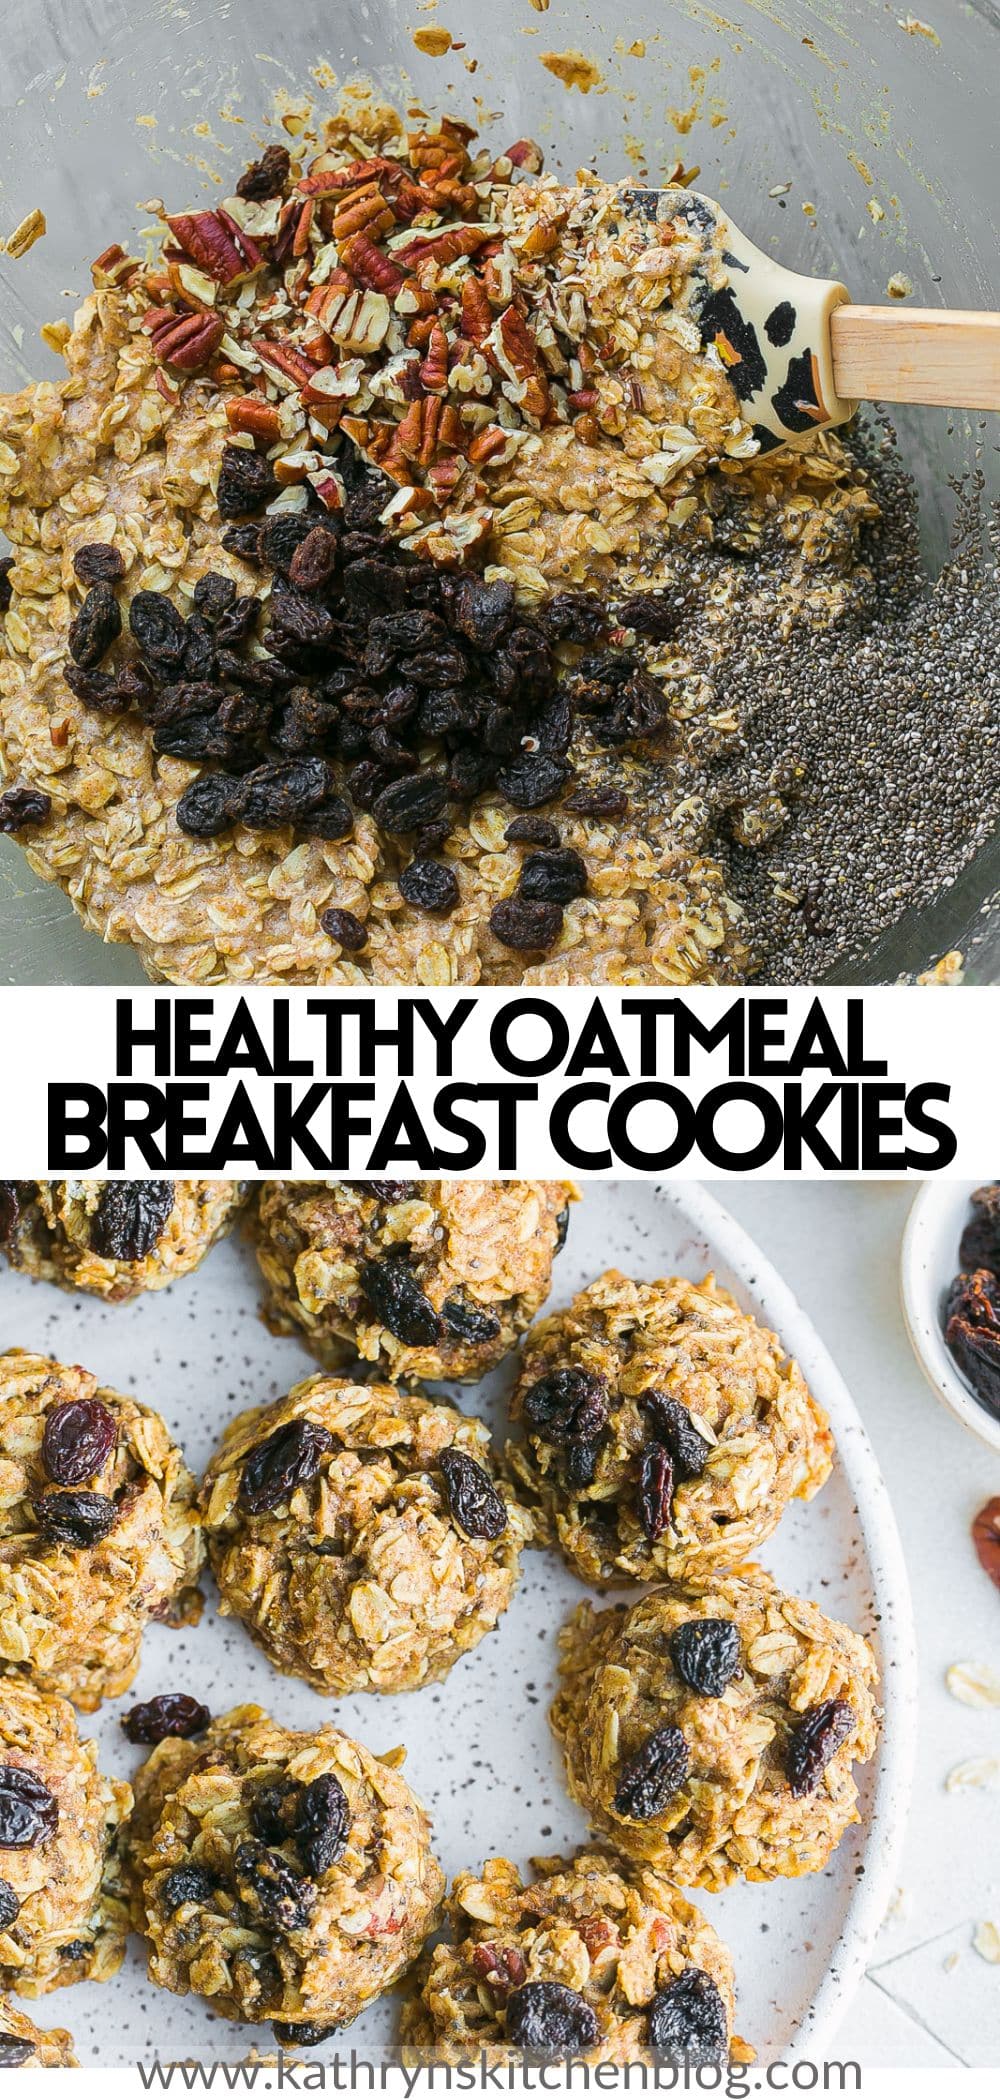 Oatmeal Raisin Breakfast Cookies make a perfect grab and go breakfast, snack or dessert. Made with wholesome ingredients and has no refined sugars or butter. Soft, chewy, and so satisfying! via @kathrynskitchen